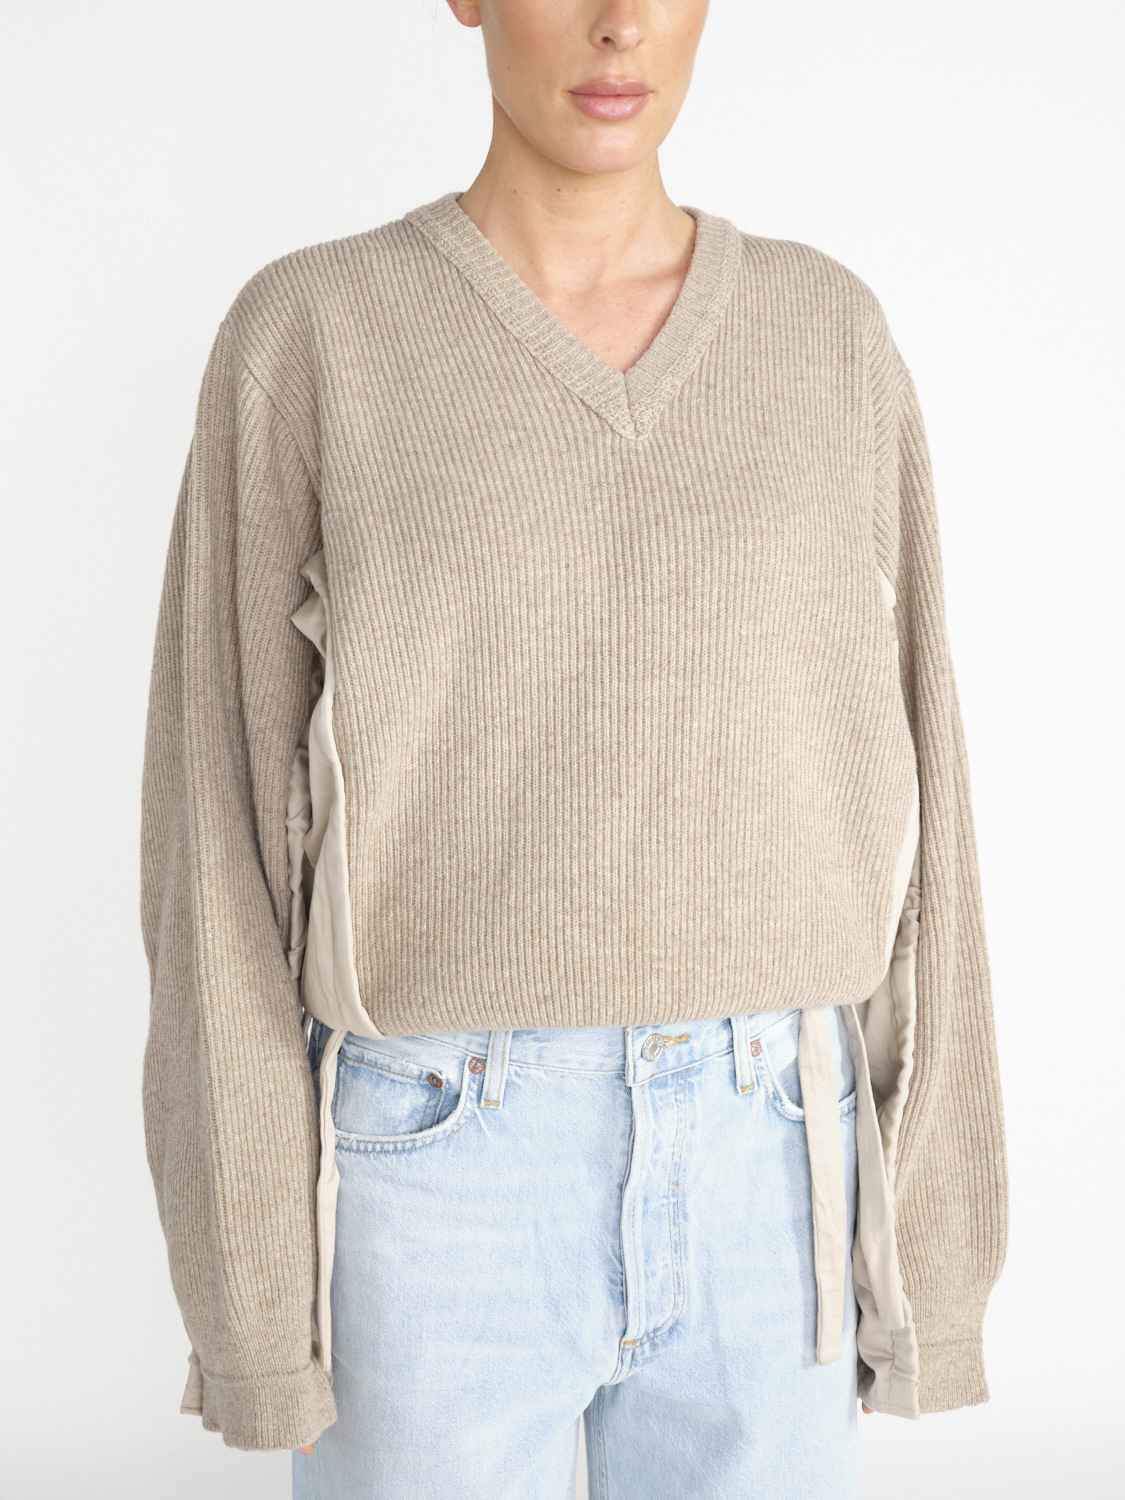 Woven sweater with curved sleeves 